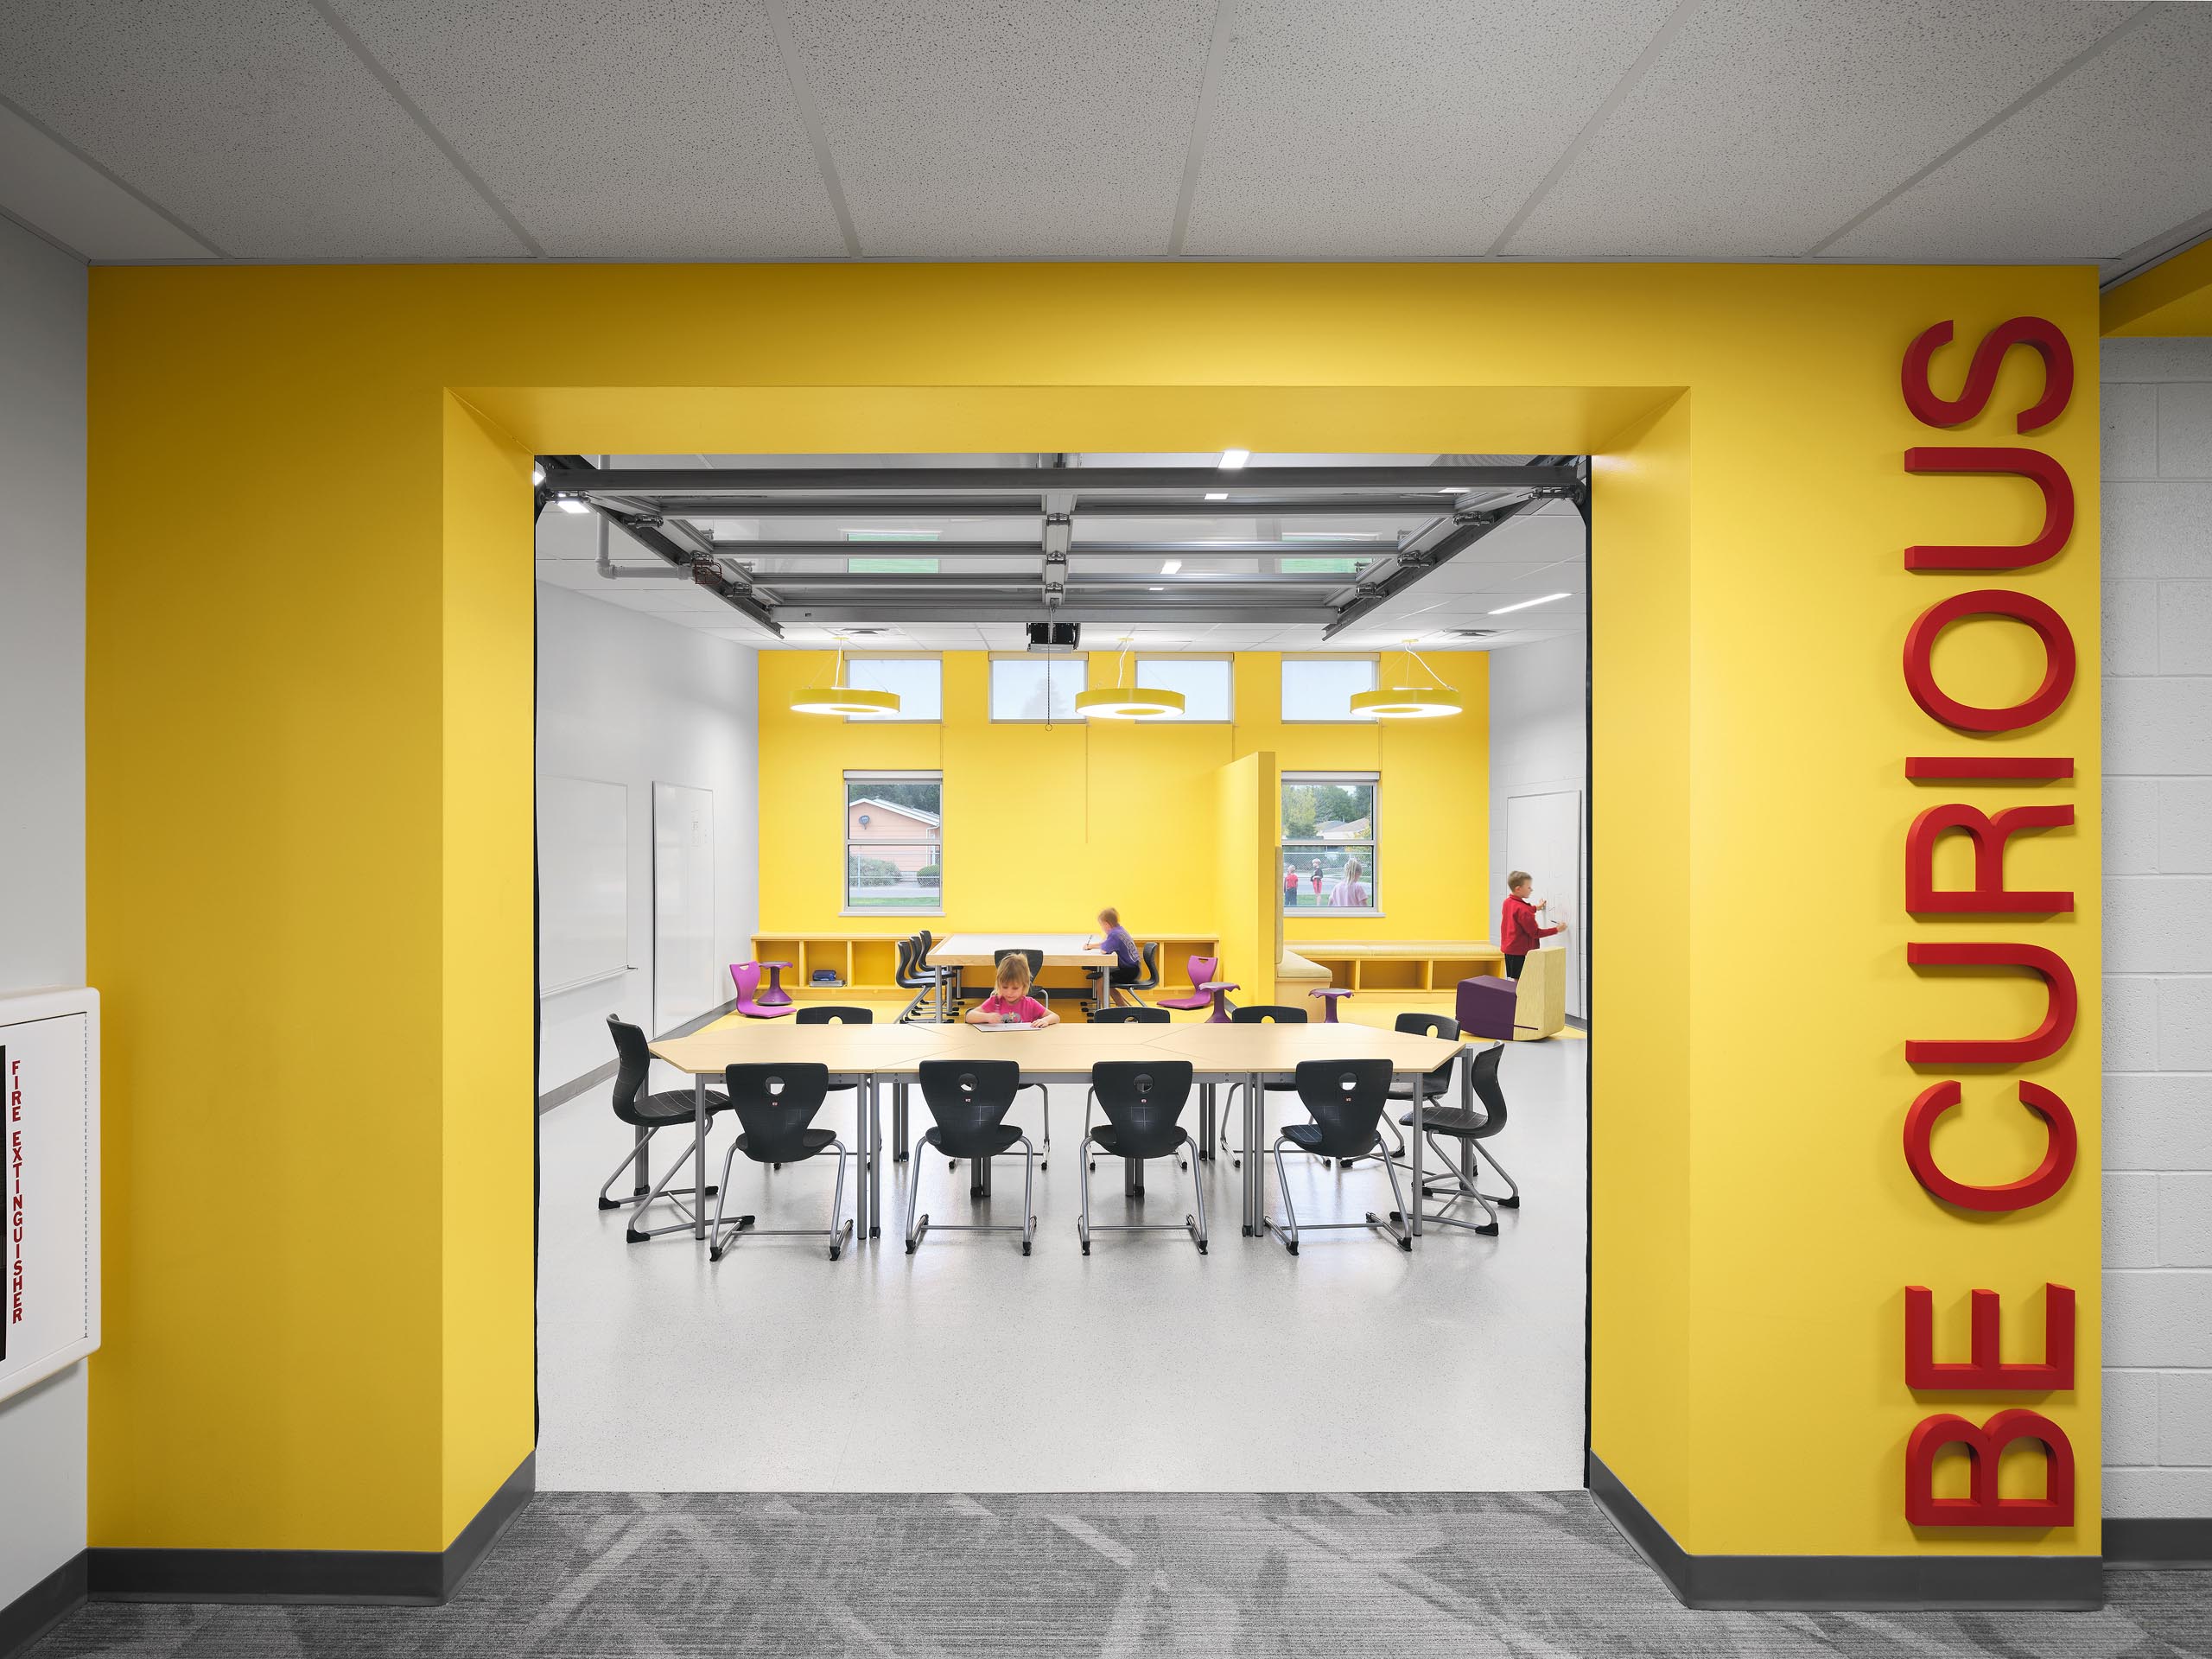 Architectural photography by Warren Diggles. Eaton Elementary students in room with bold yellow colors and overhead door opening. K-12 remodel project by RB+B Architects and FCI Constructors.